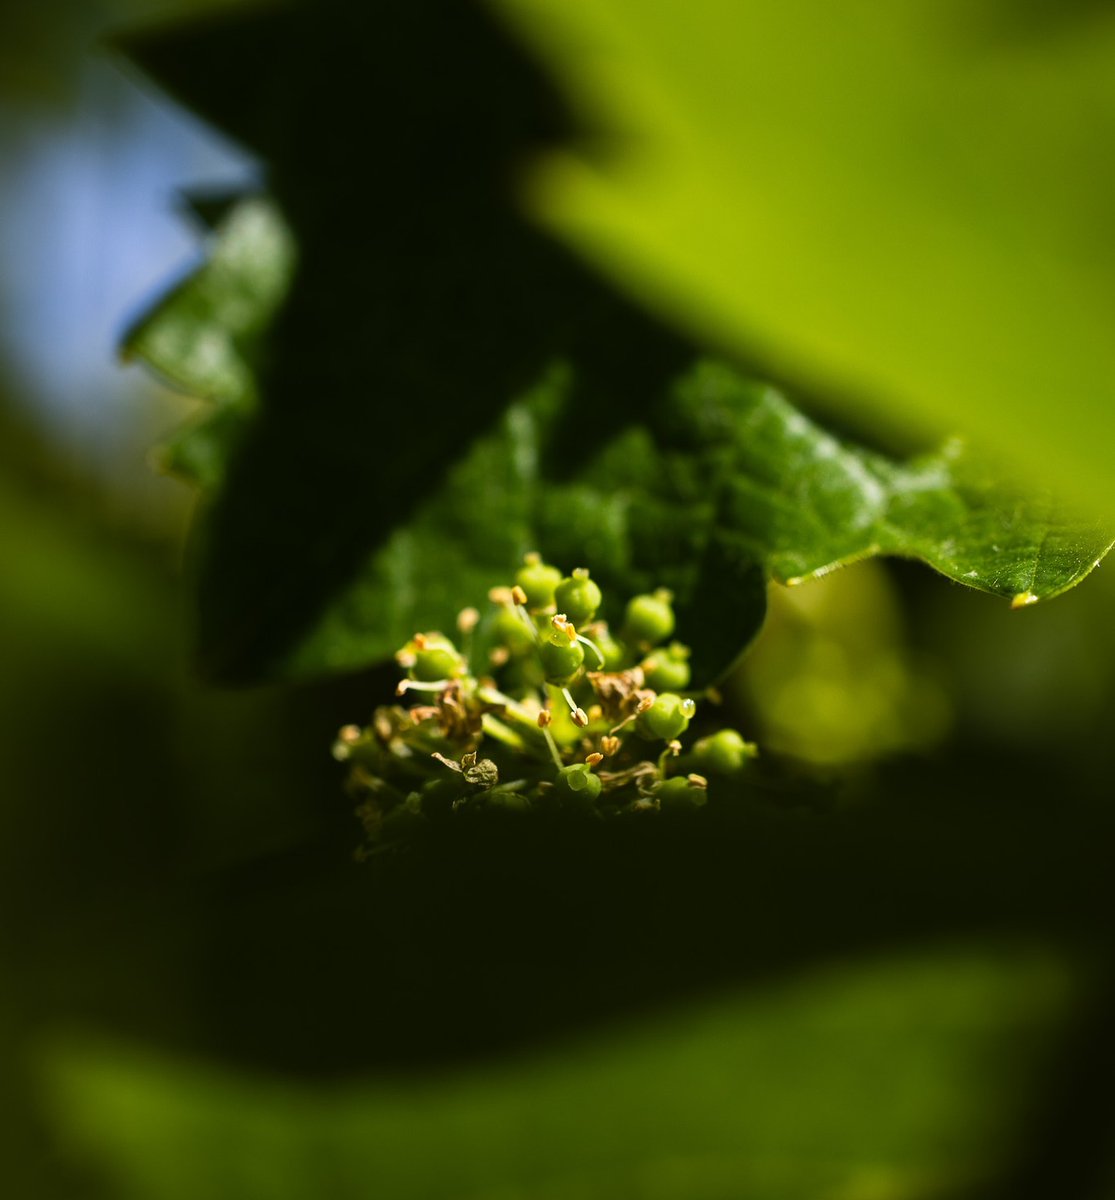 A little *peek* at some Chase Cellars first #Zinfandel berries as the vines begin to flower & set fruit! ⁣ ⁣ 📸 IG: lens.of_bliu⁣ Explore more of Chase Cellars: l8r.it/tAHV #napa #napavineyard #oldvine #fruitset #viticulture #napavalley #appellationsthelena